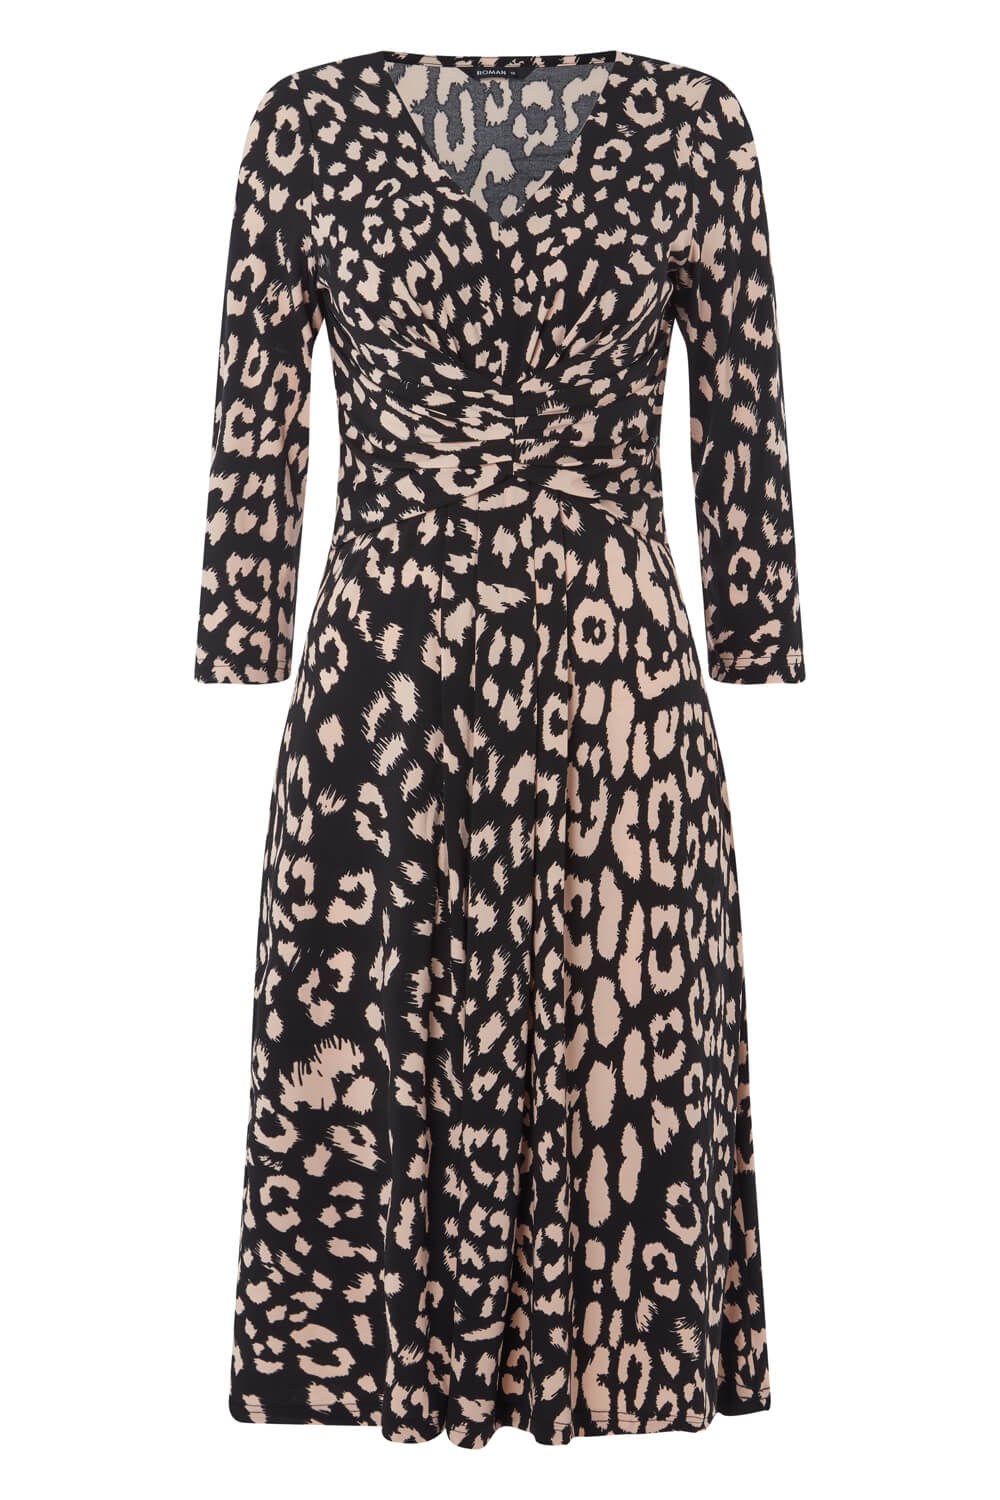 Light Pink Animal Print Fit And Flare Dress, Image 5 of 5